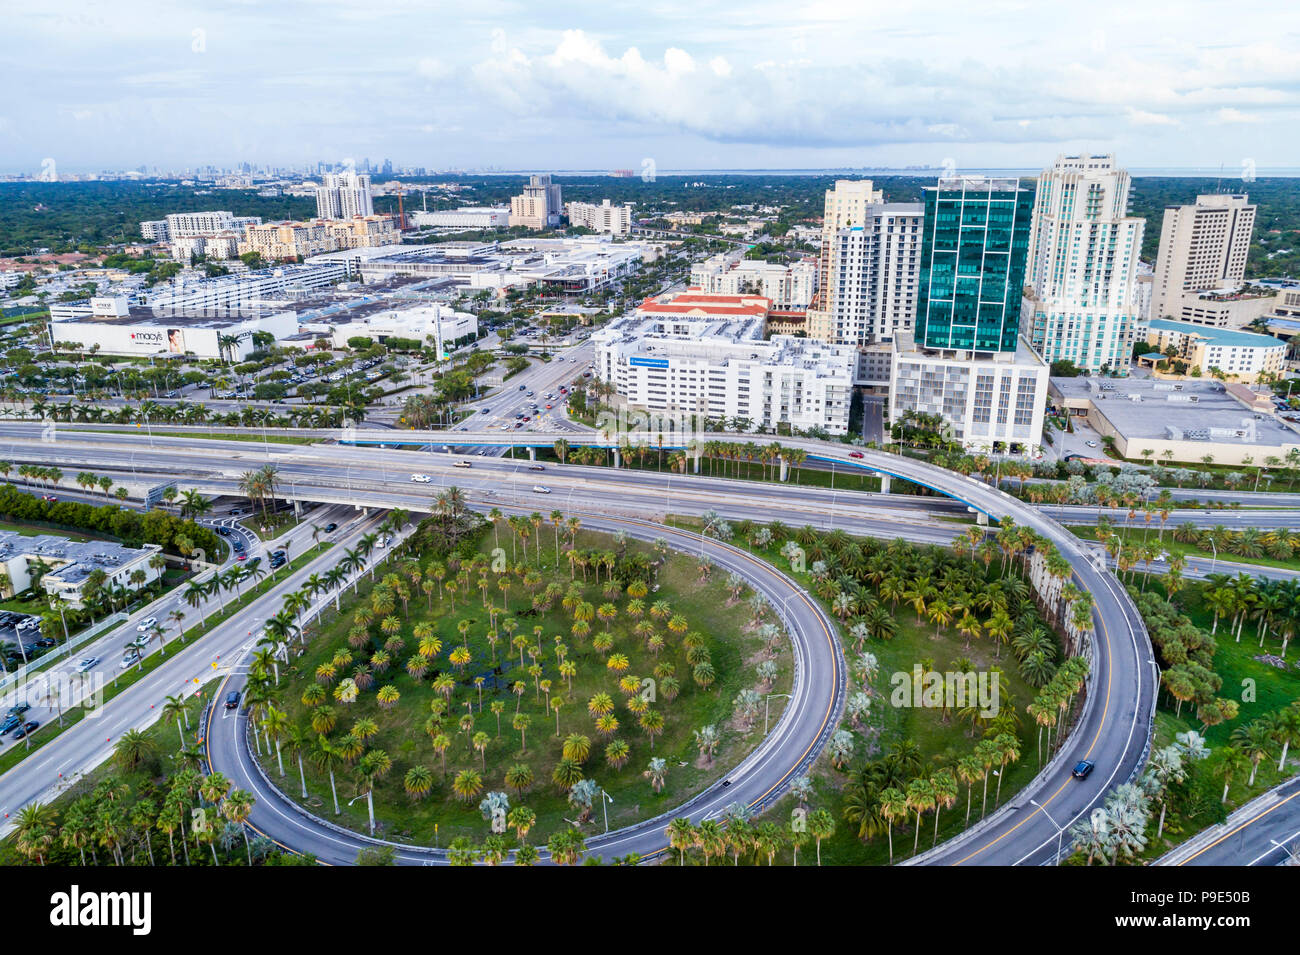 Miami Florida,Town Center One at Dadeland,Palmetto Expressway,highway,entrance exit,city skyline office buildings,Dadeland Mall,SW 88th Street Kendall Stock Photo